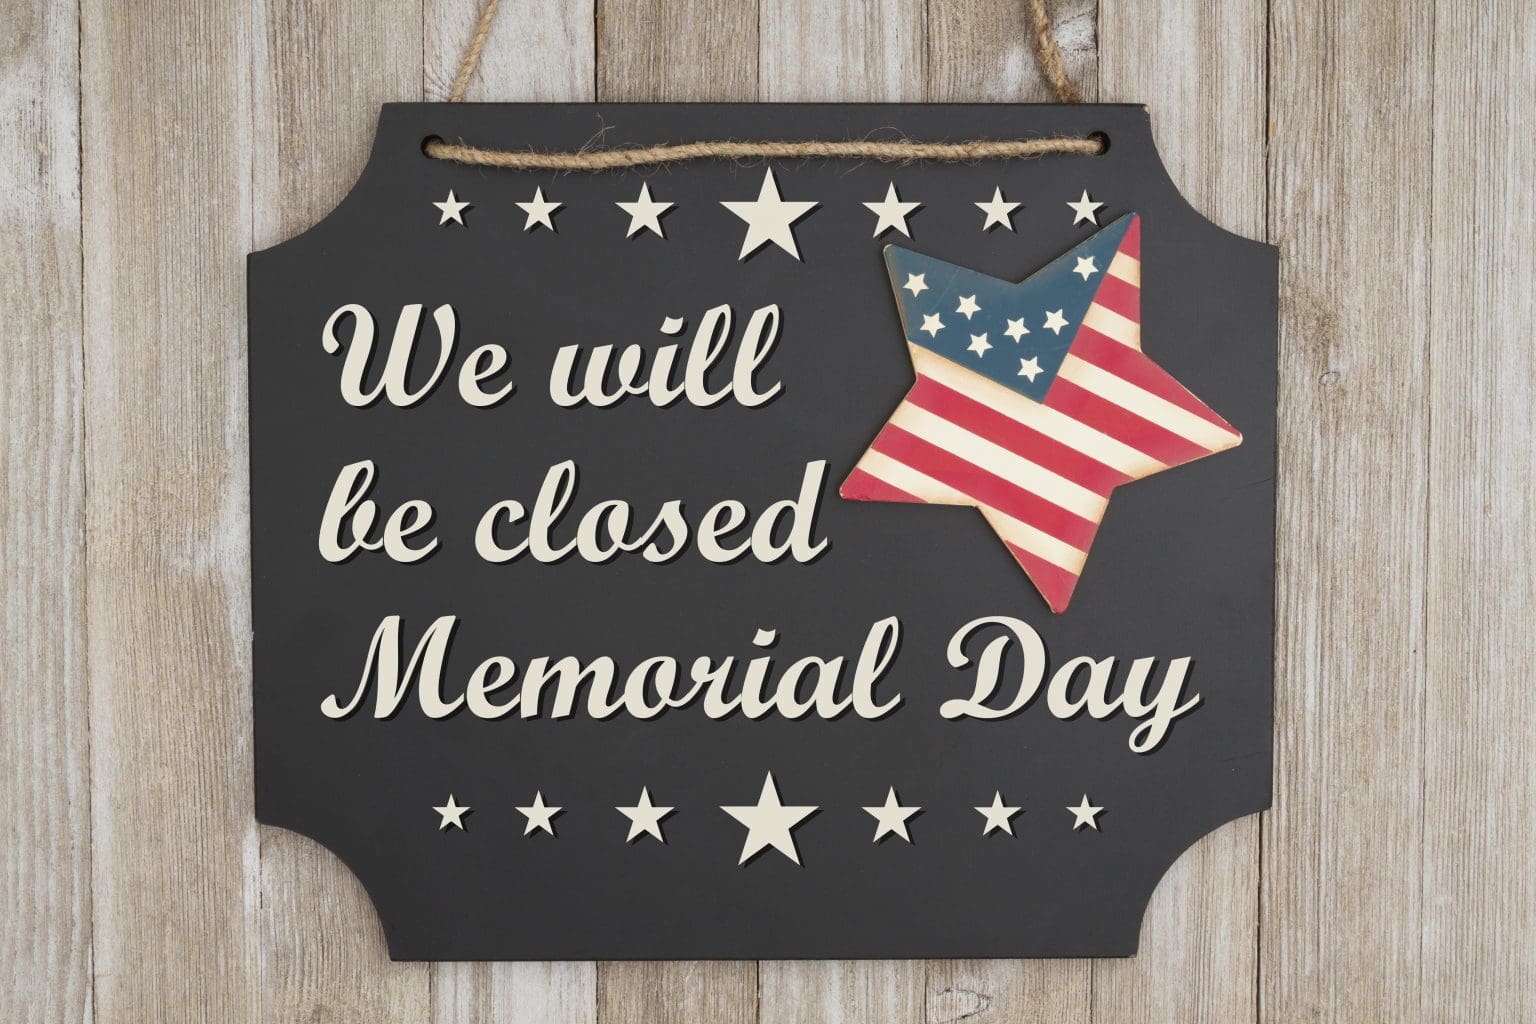 free-printable-sign-closed-memorial-day-free-family-printables